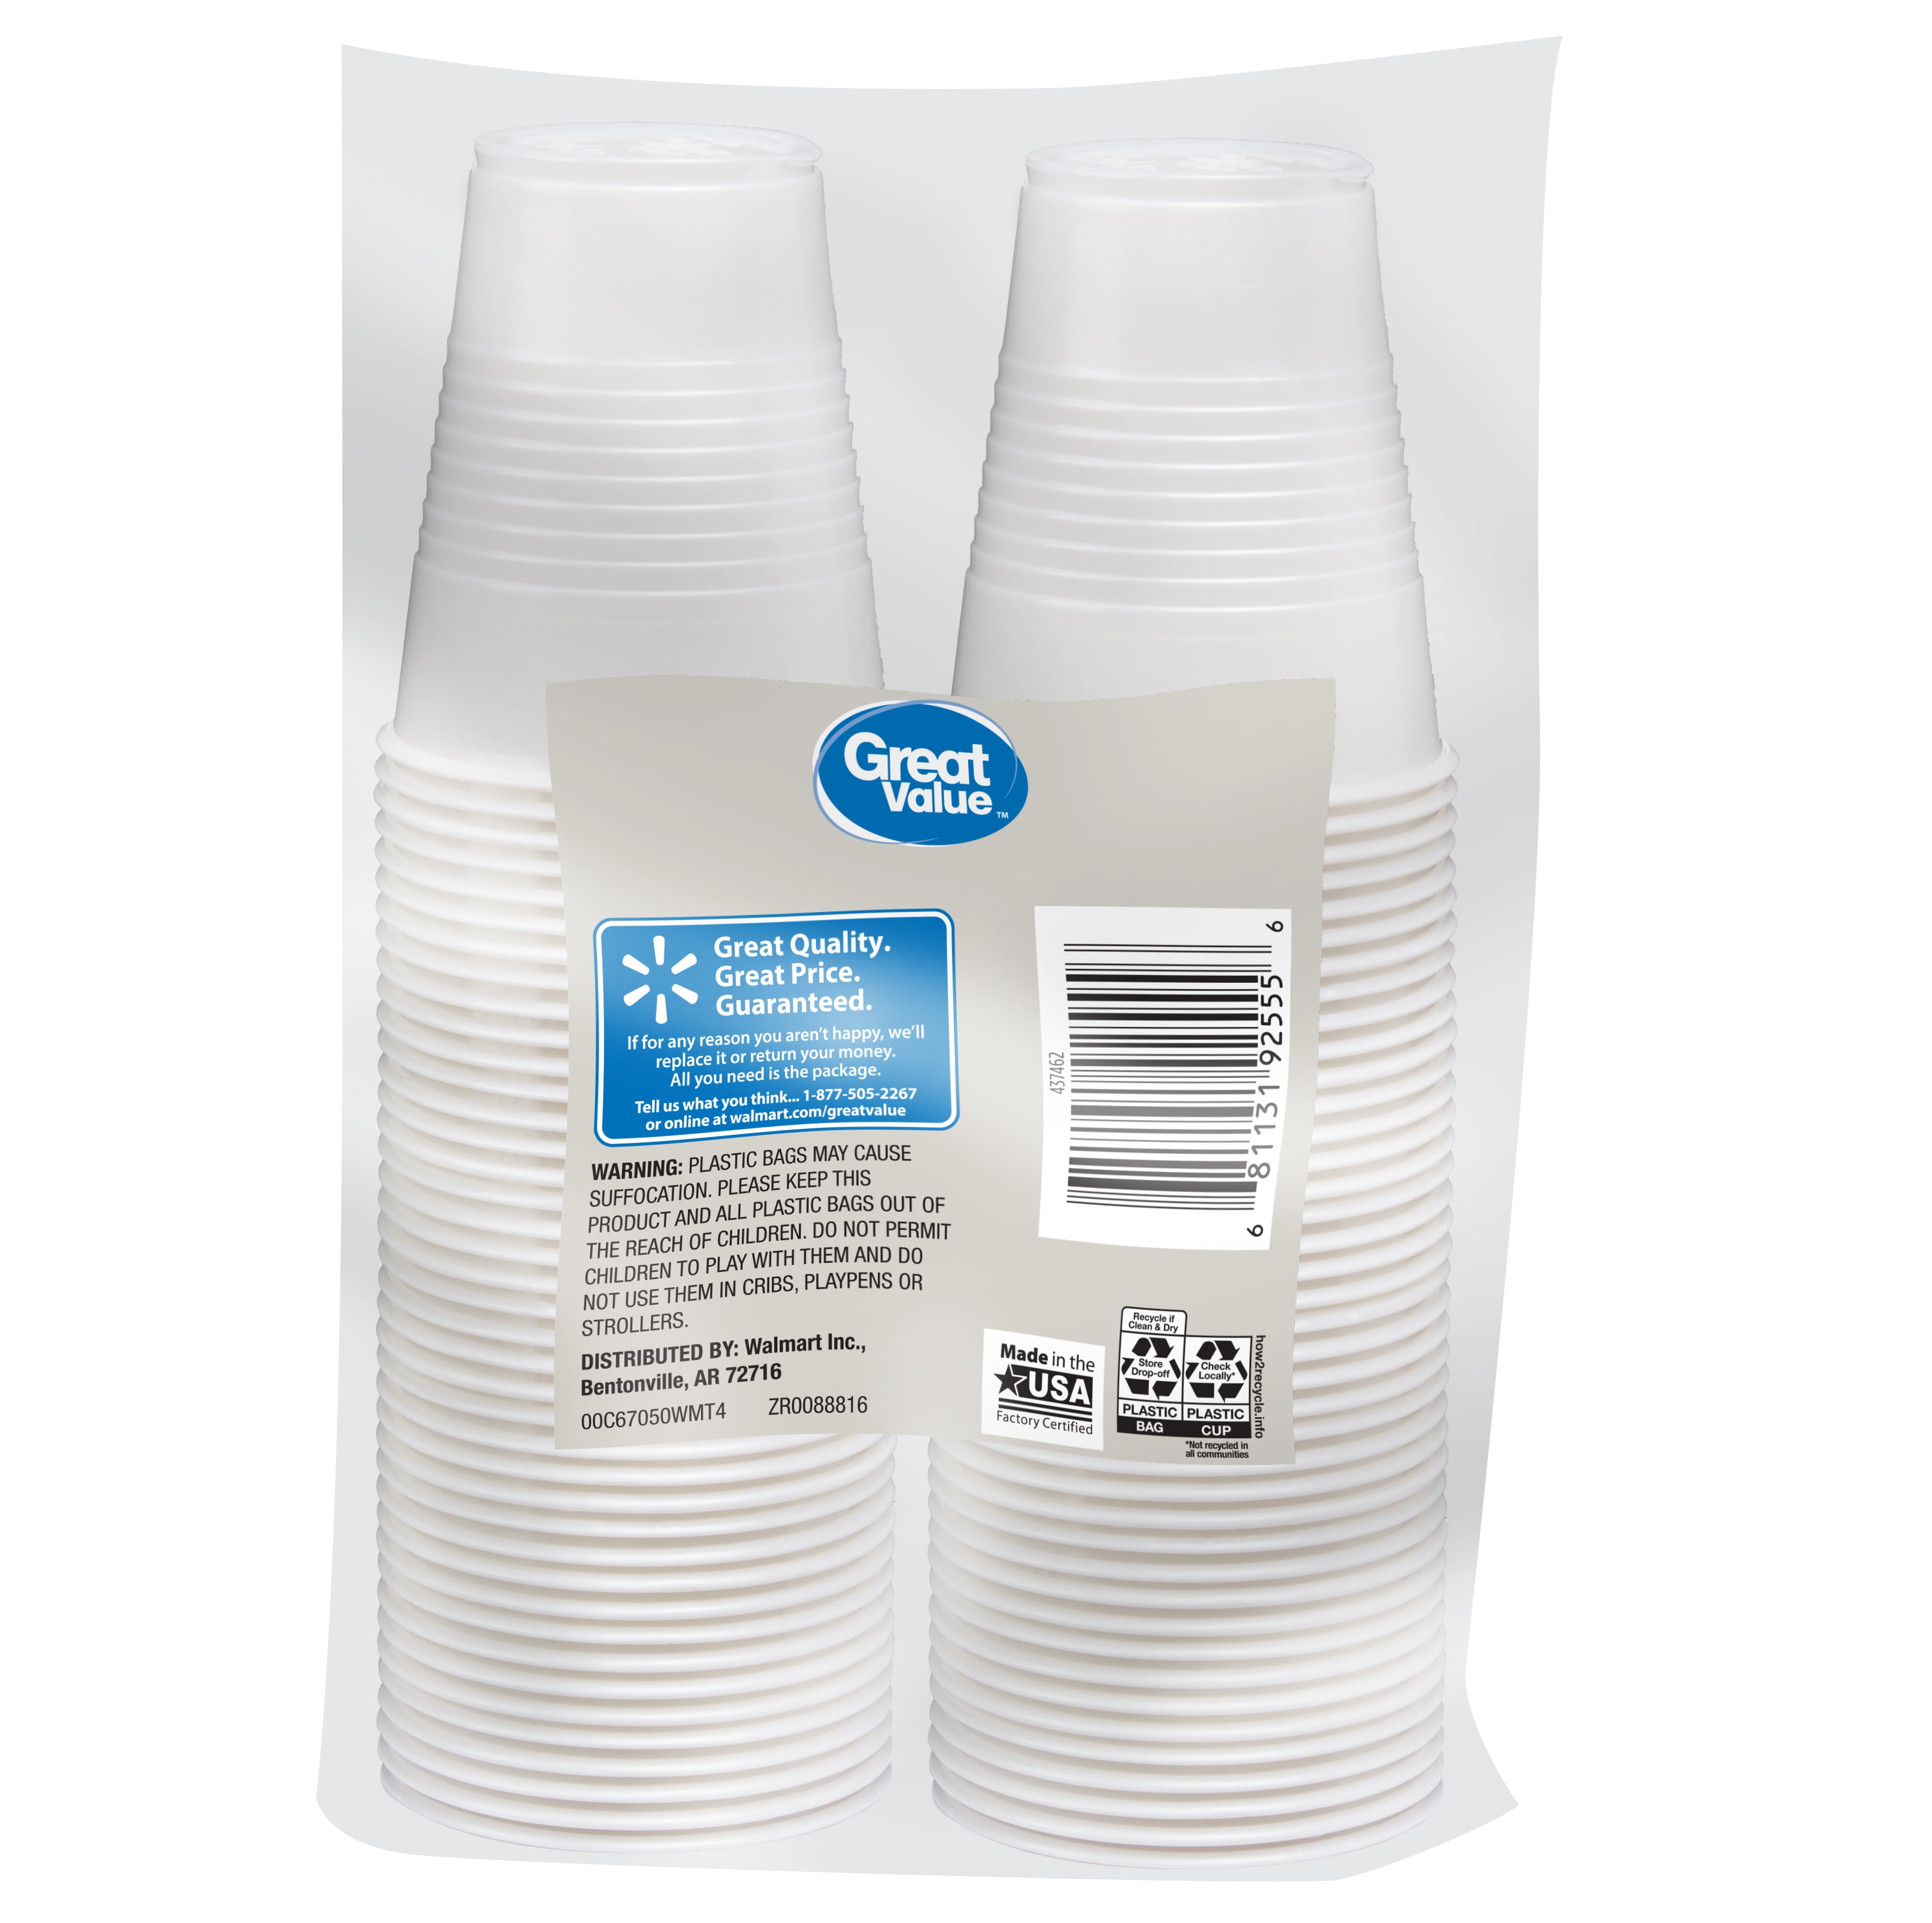 Loreso 5 oz. Hard Plastic Disposable Cups, 96 Count, Clear, Heavy Duty, Food Grade, and Recyclable for Party Cocktails, Drinks, and Desserts